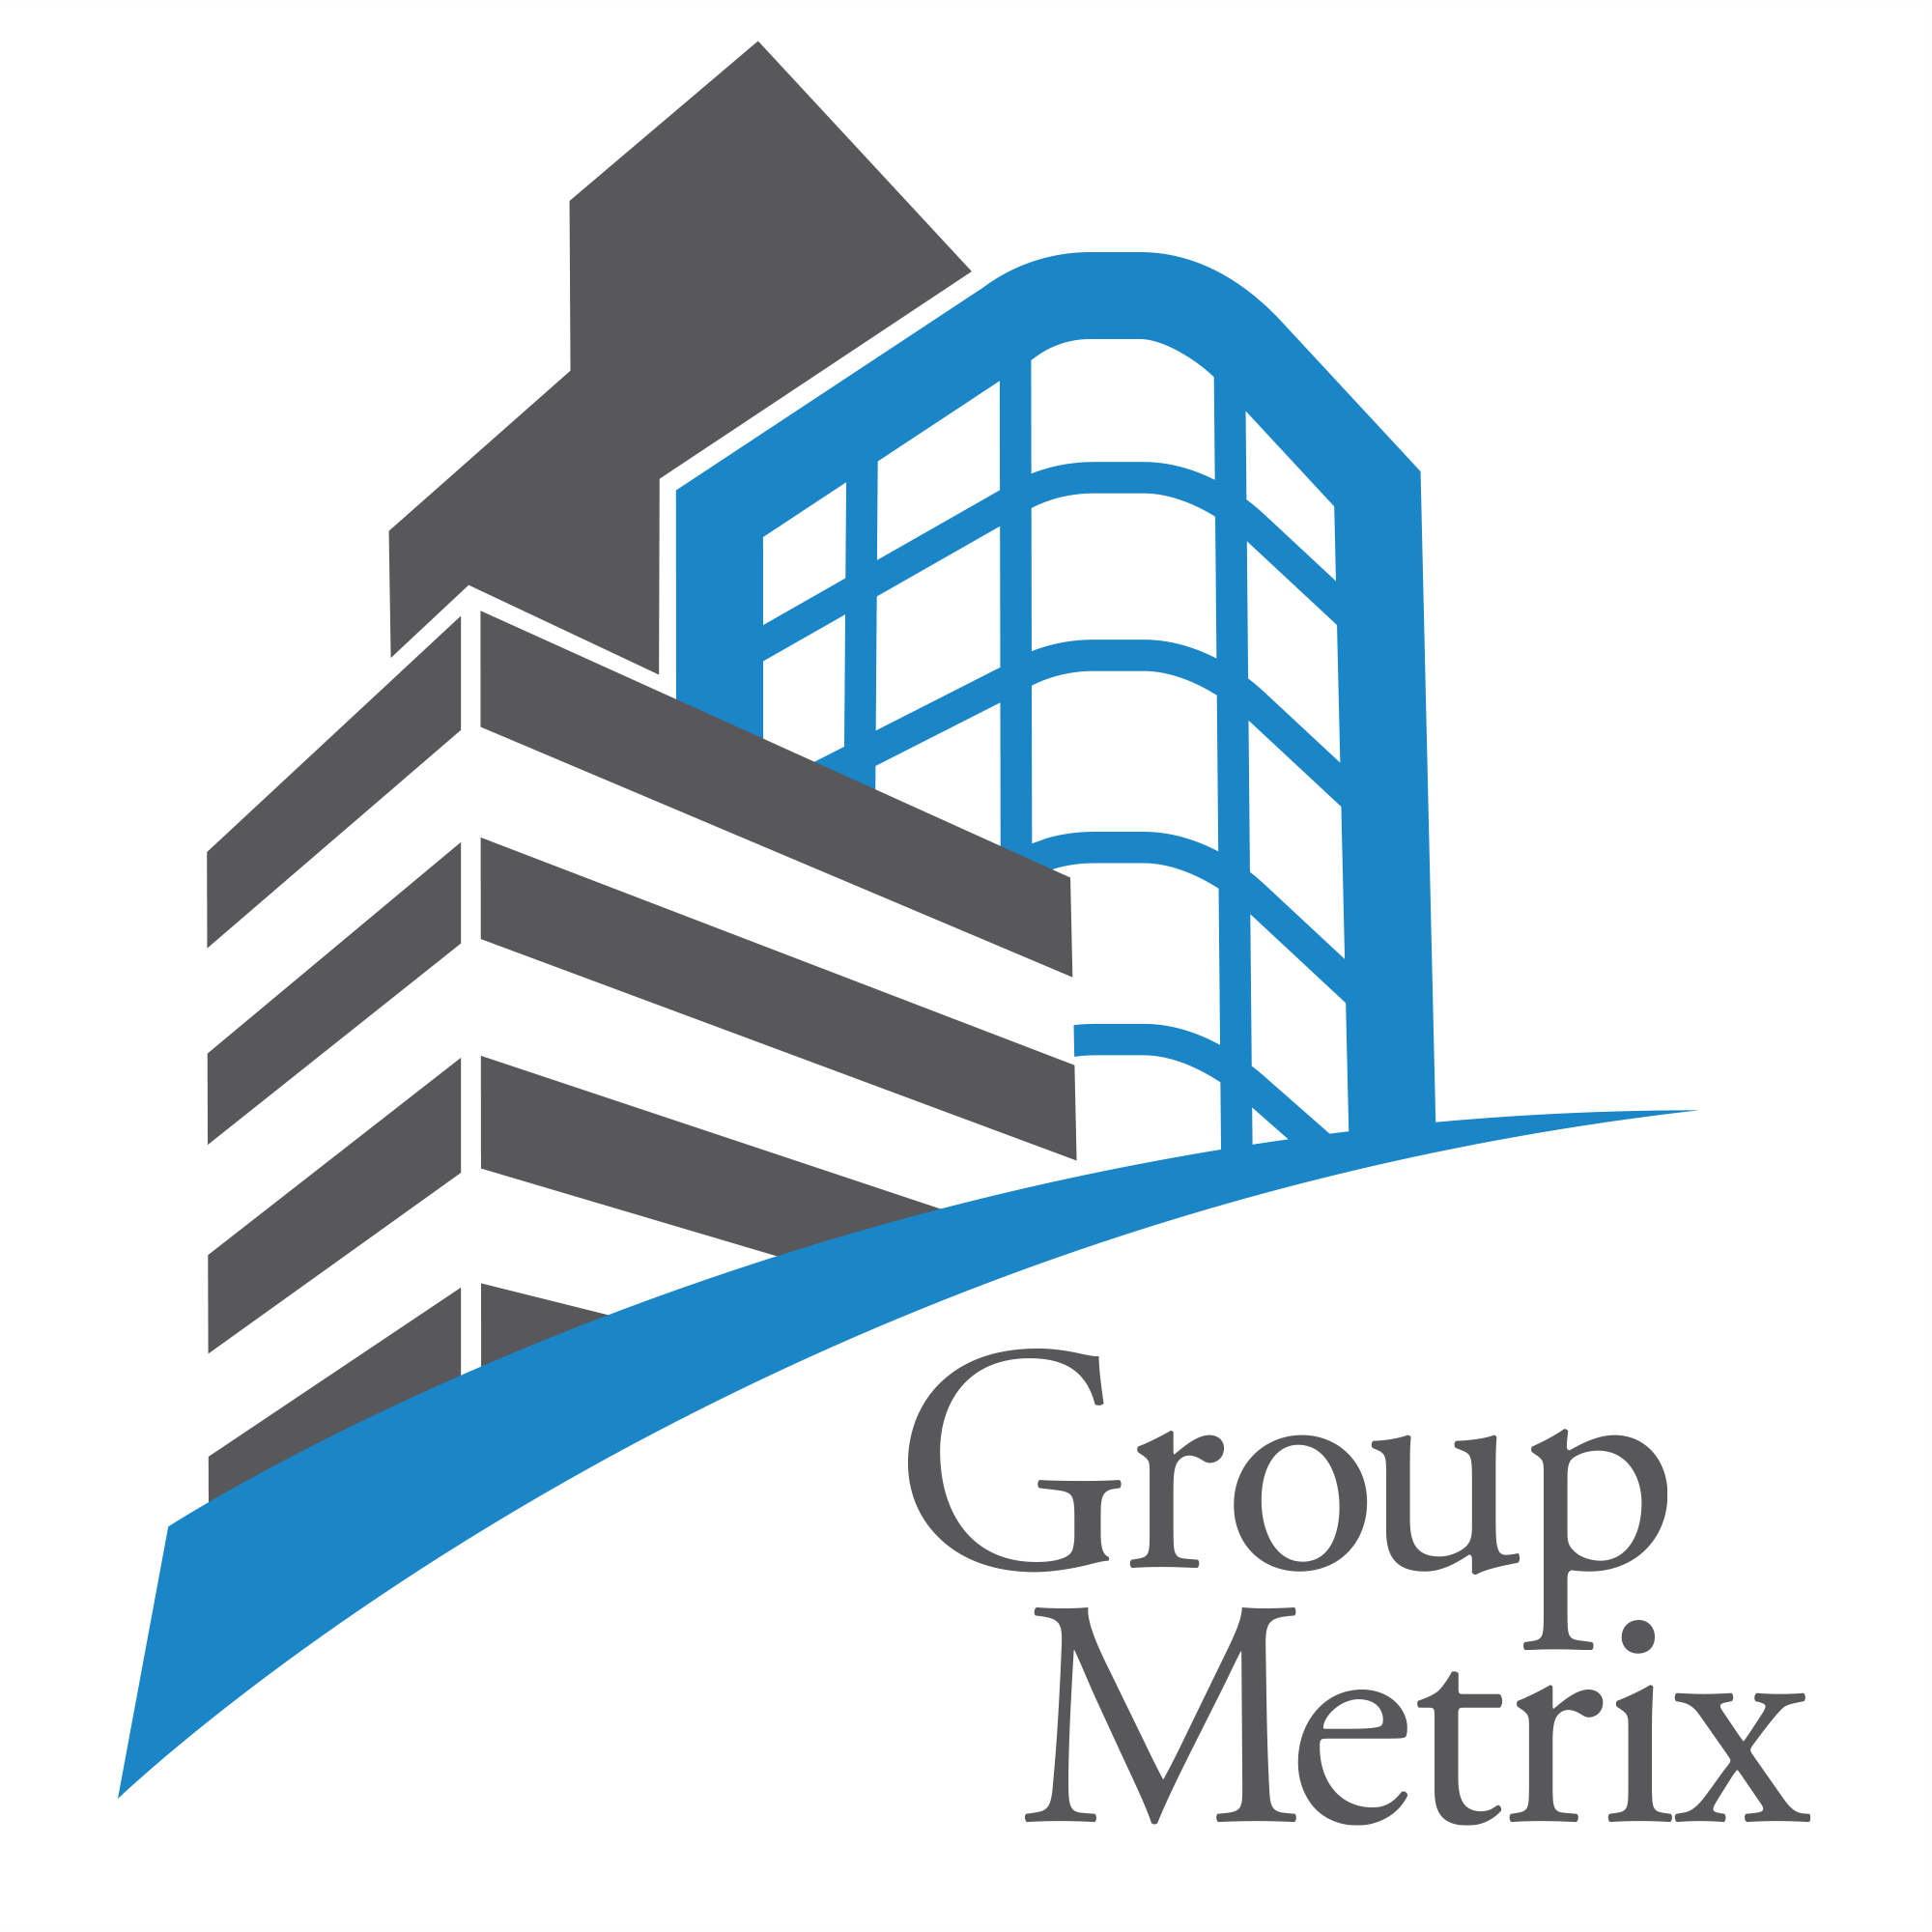 Quality Track logo with GroupMetrix product offering